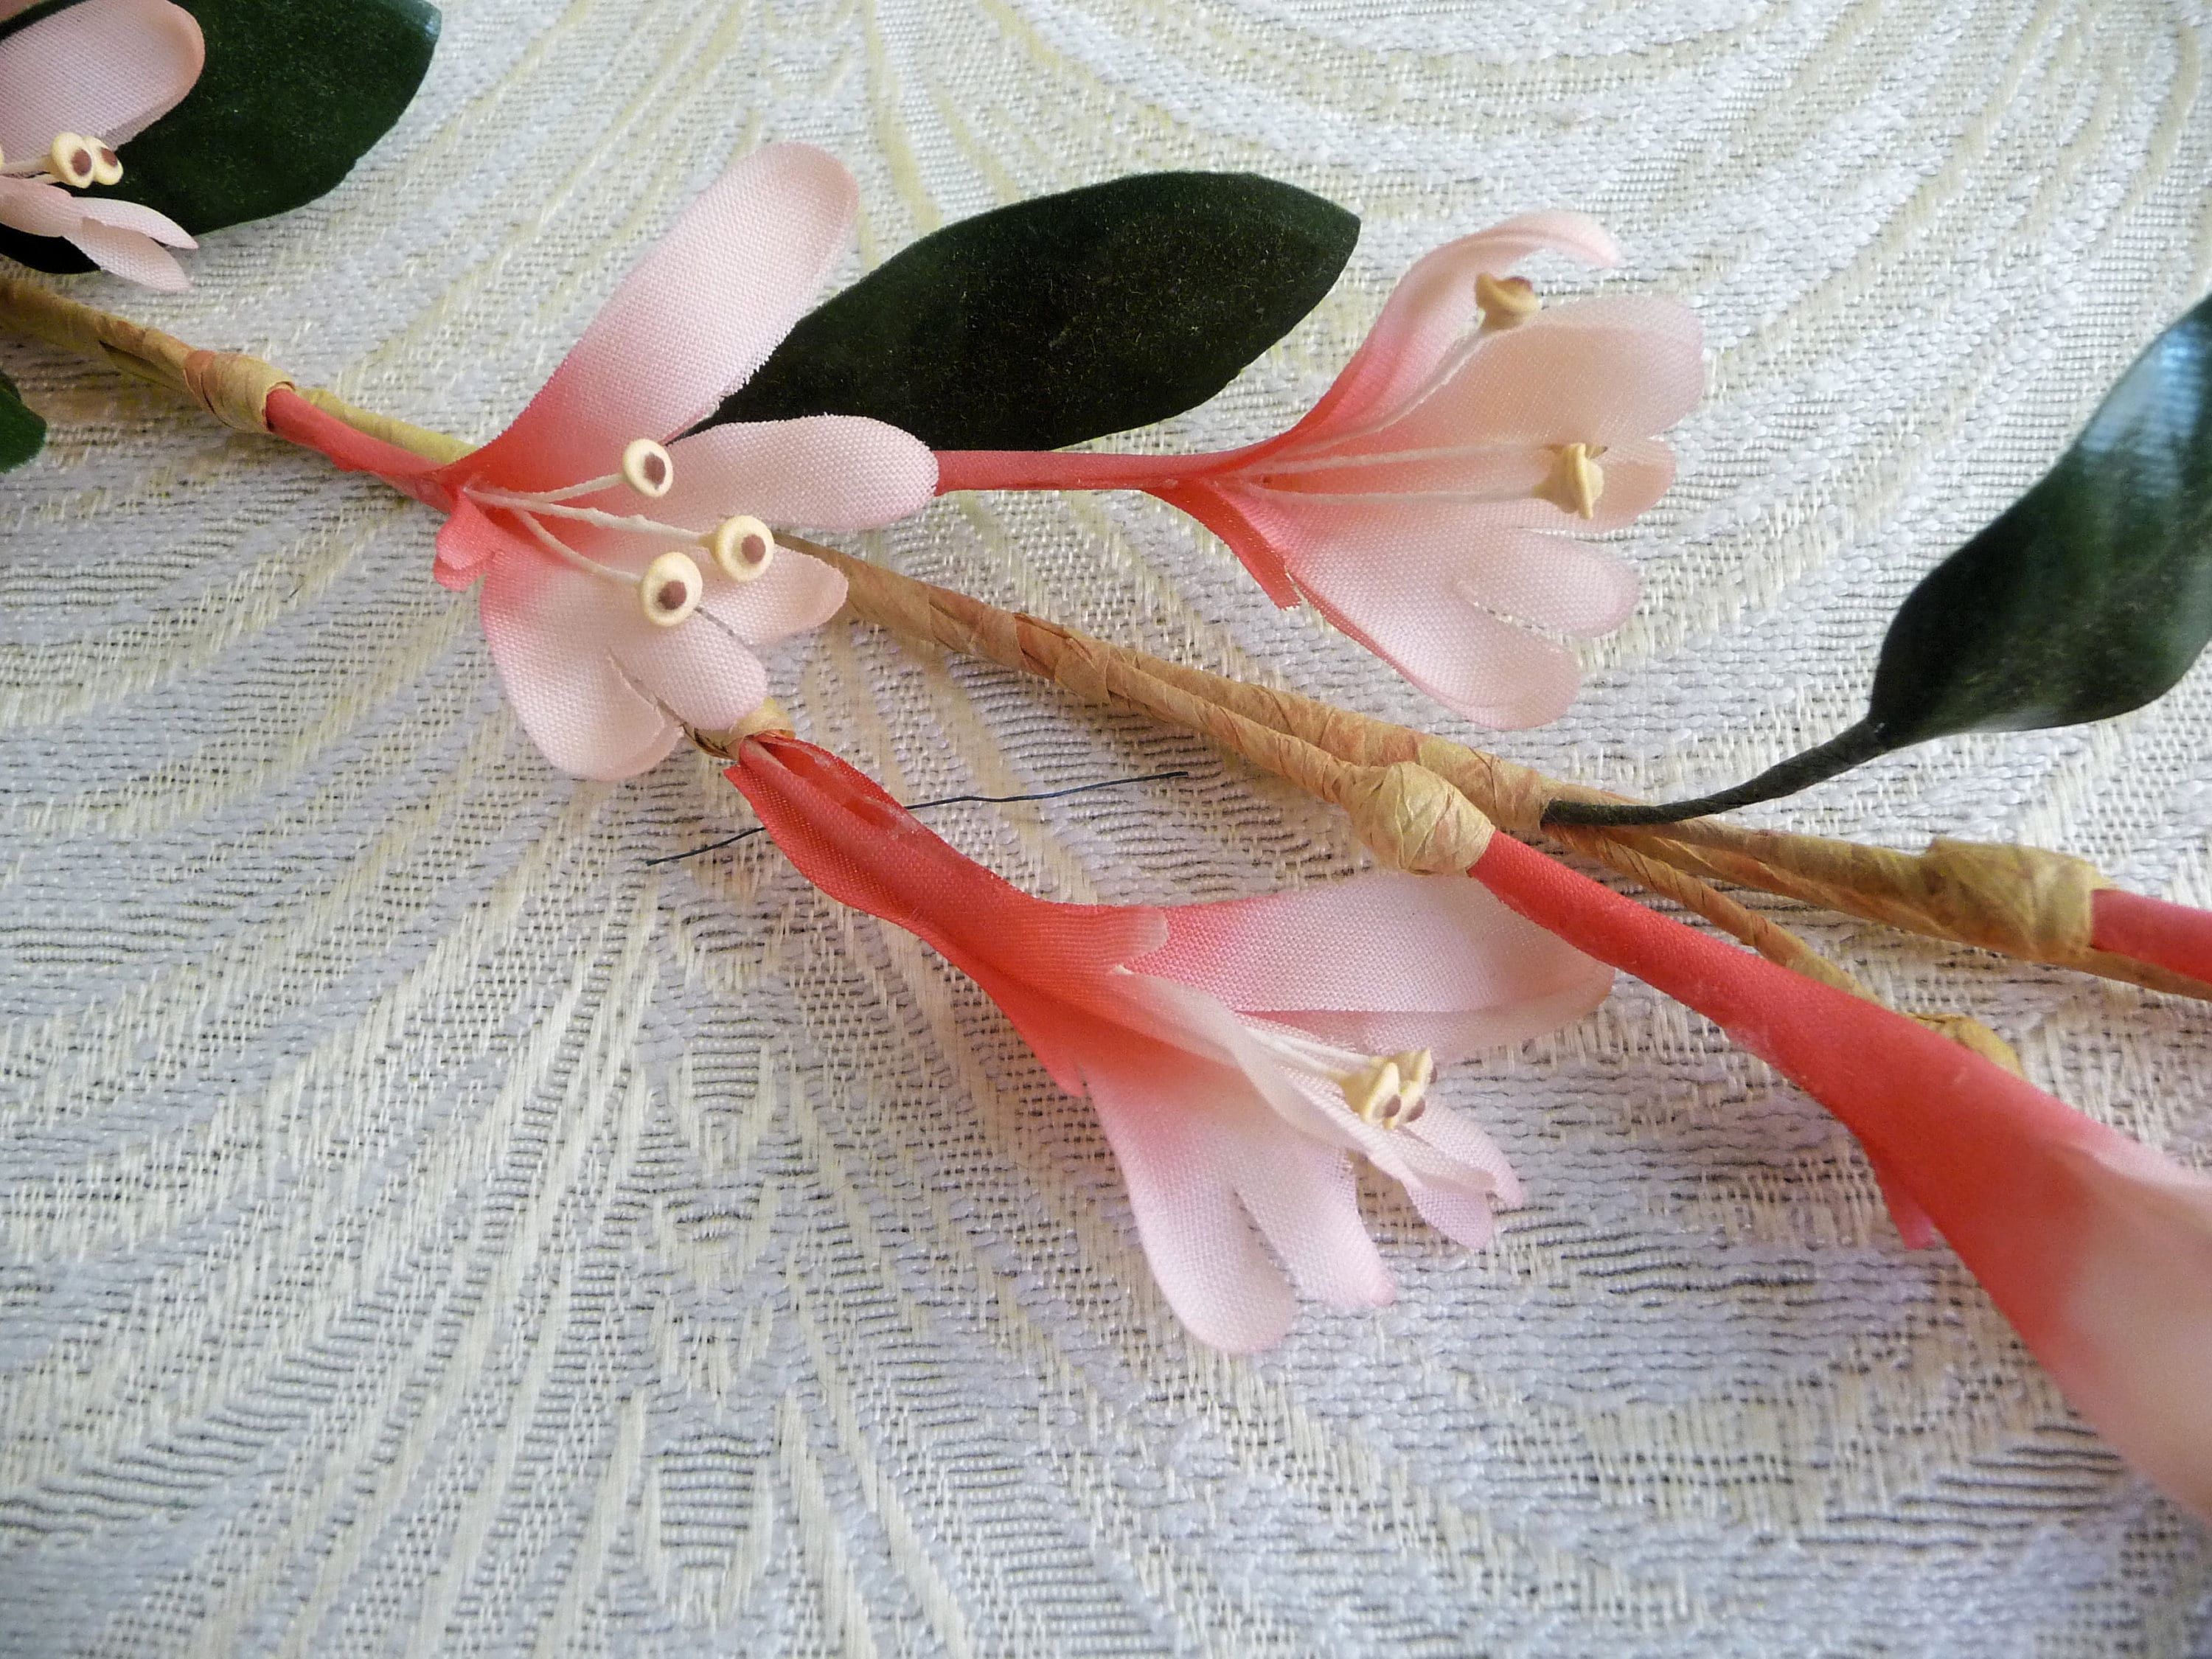 PINK millinery cloth Vintage style 6 silk FLOWER cluster yellow Stamens DOLLS!